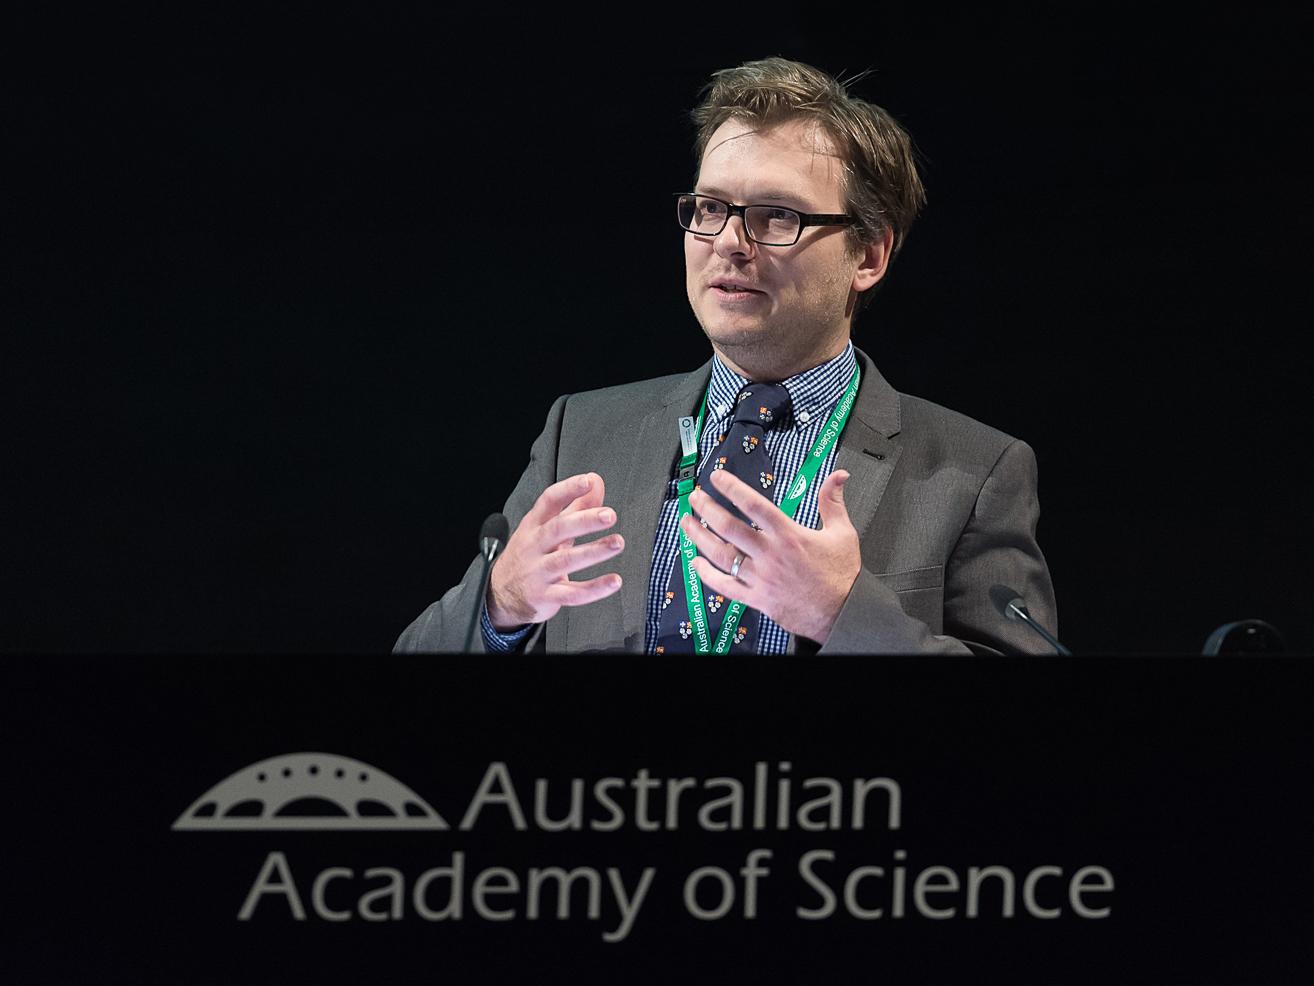 Joshua Ross wearing a suit speaking on part of a panel, with the text Australian Academy of Science